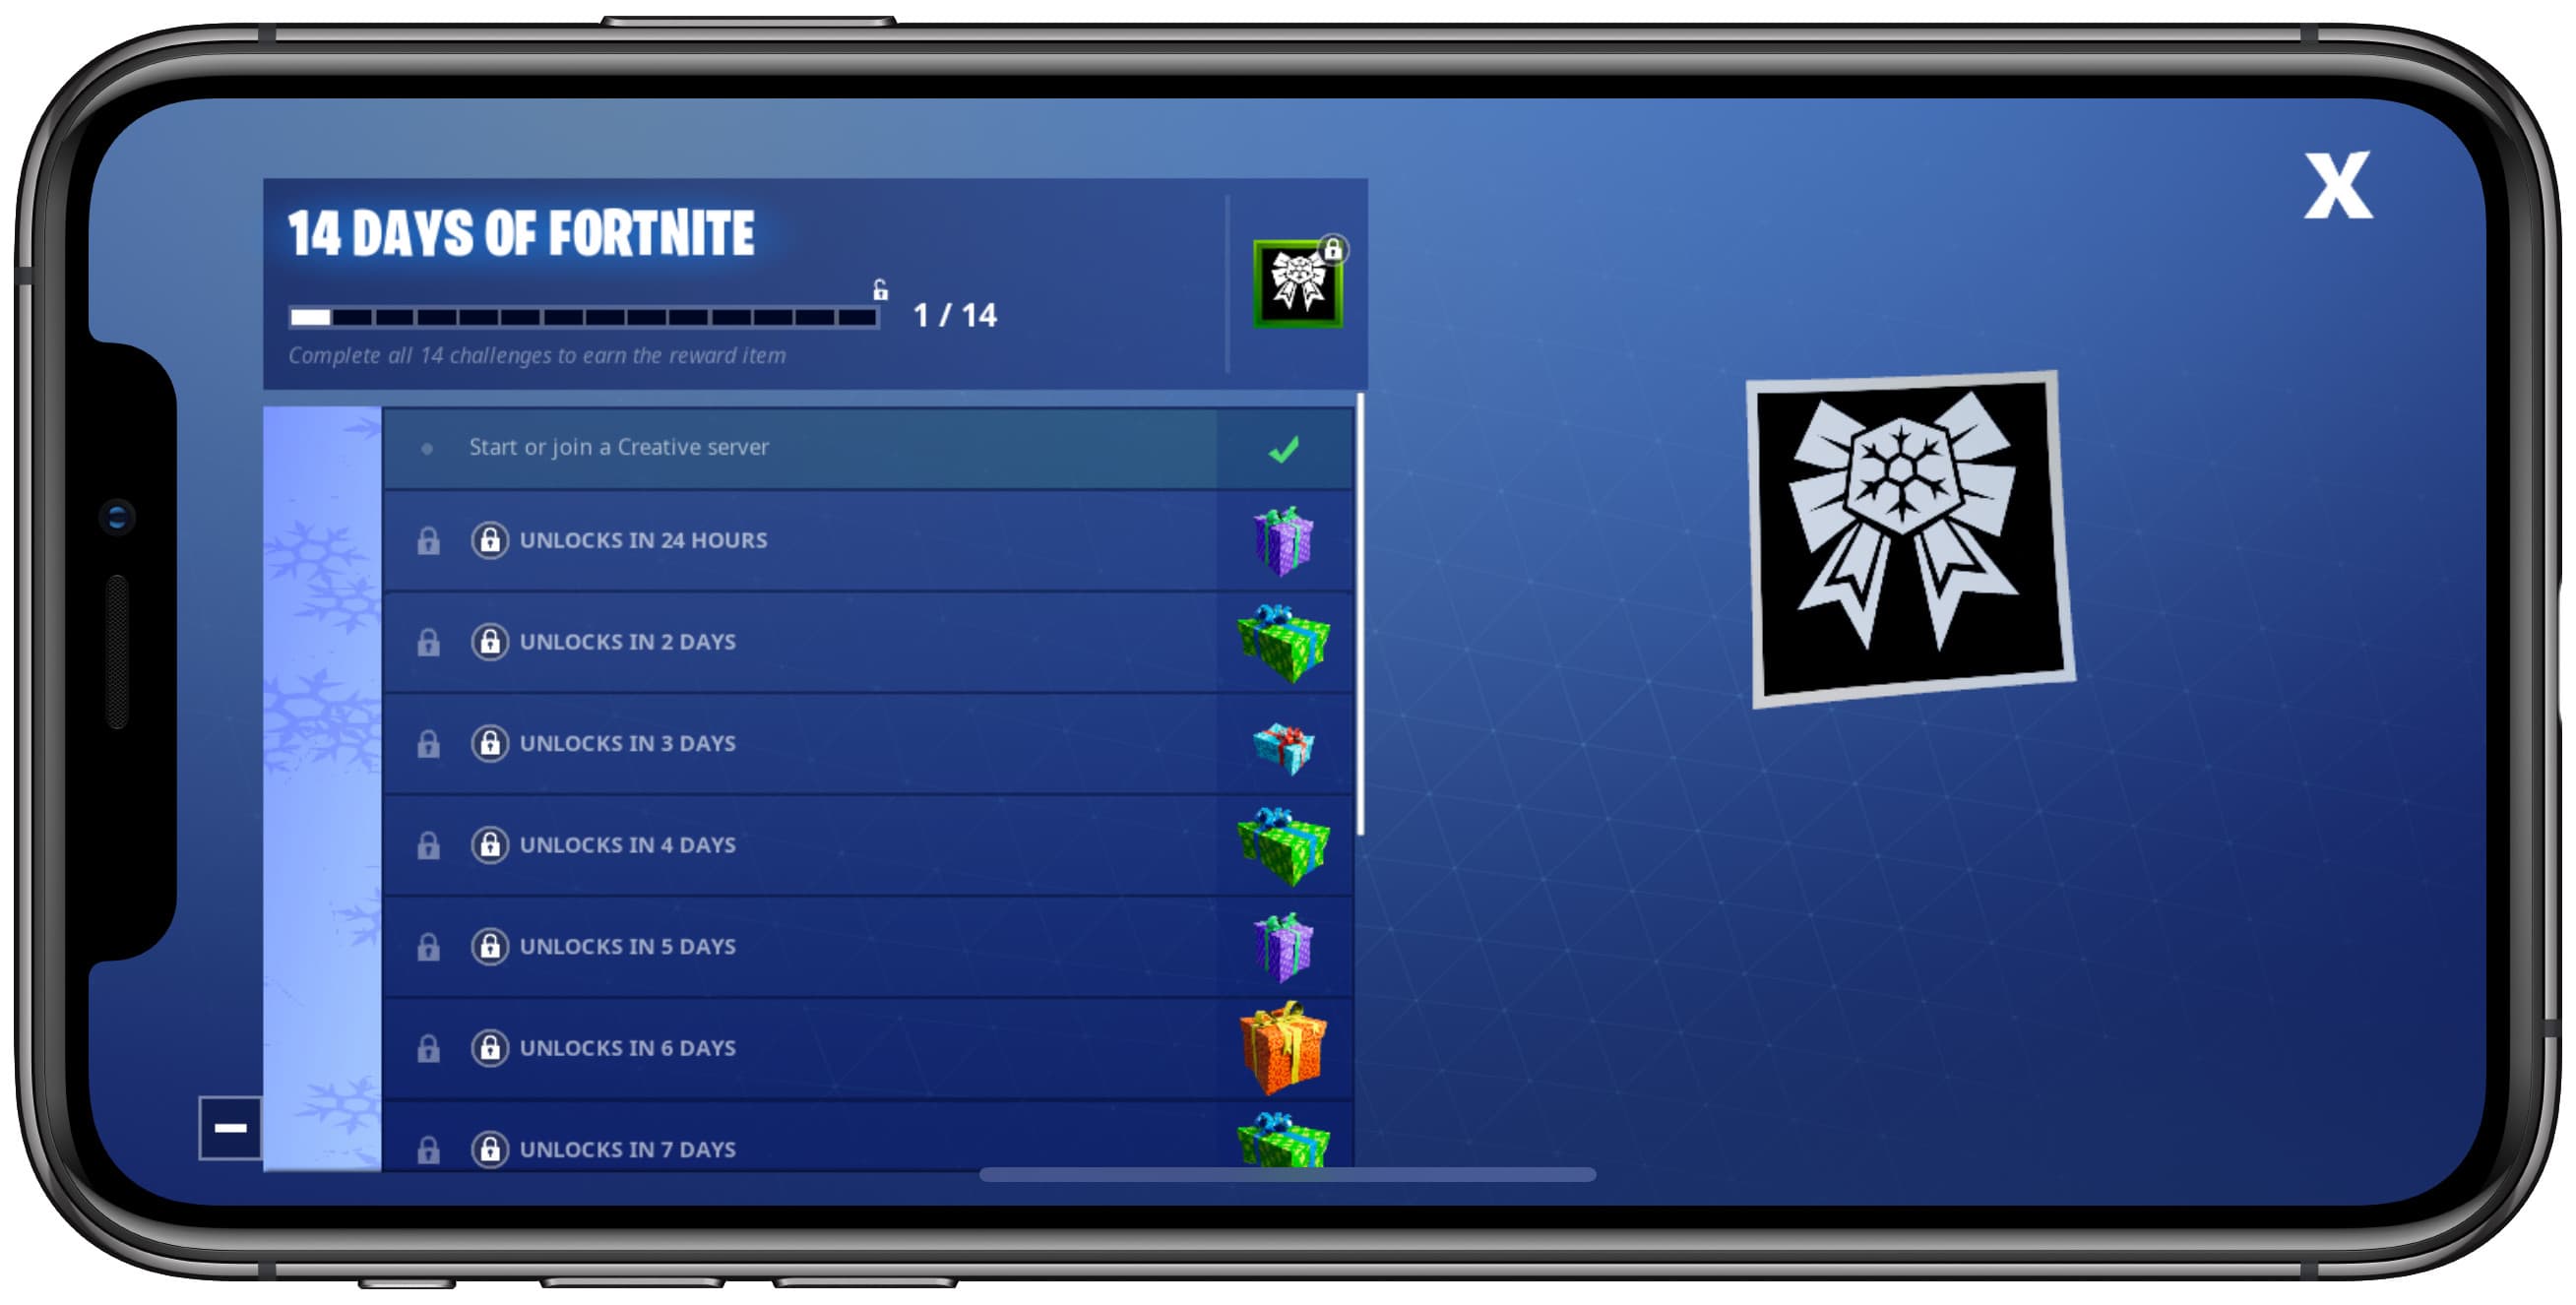 14 Days of Fortnite iPhone